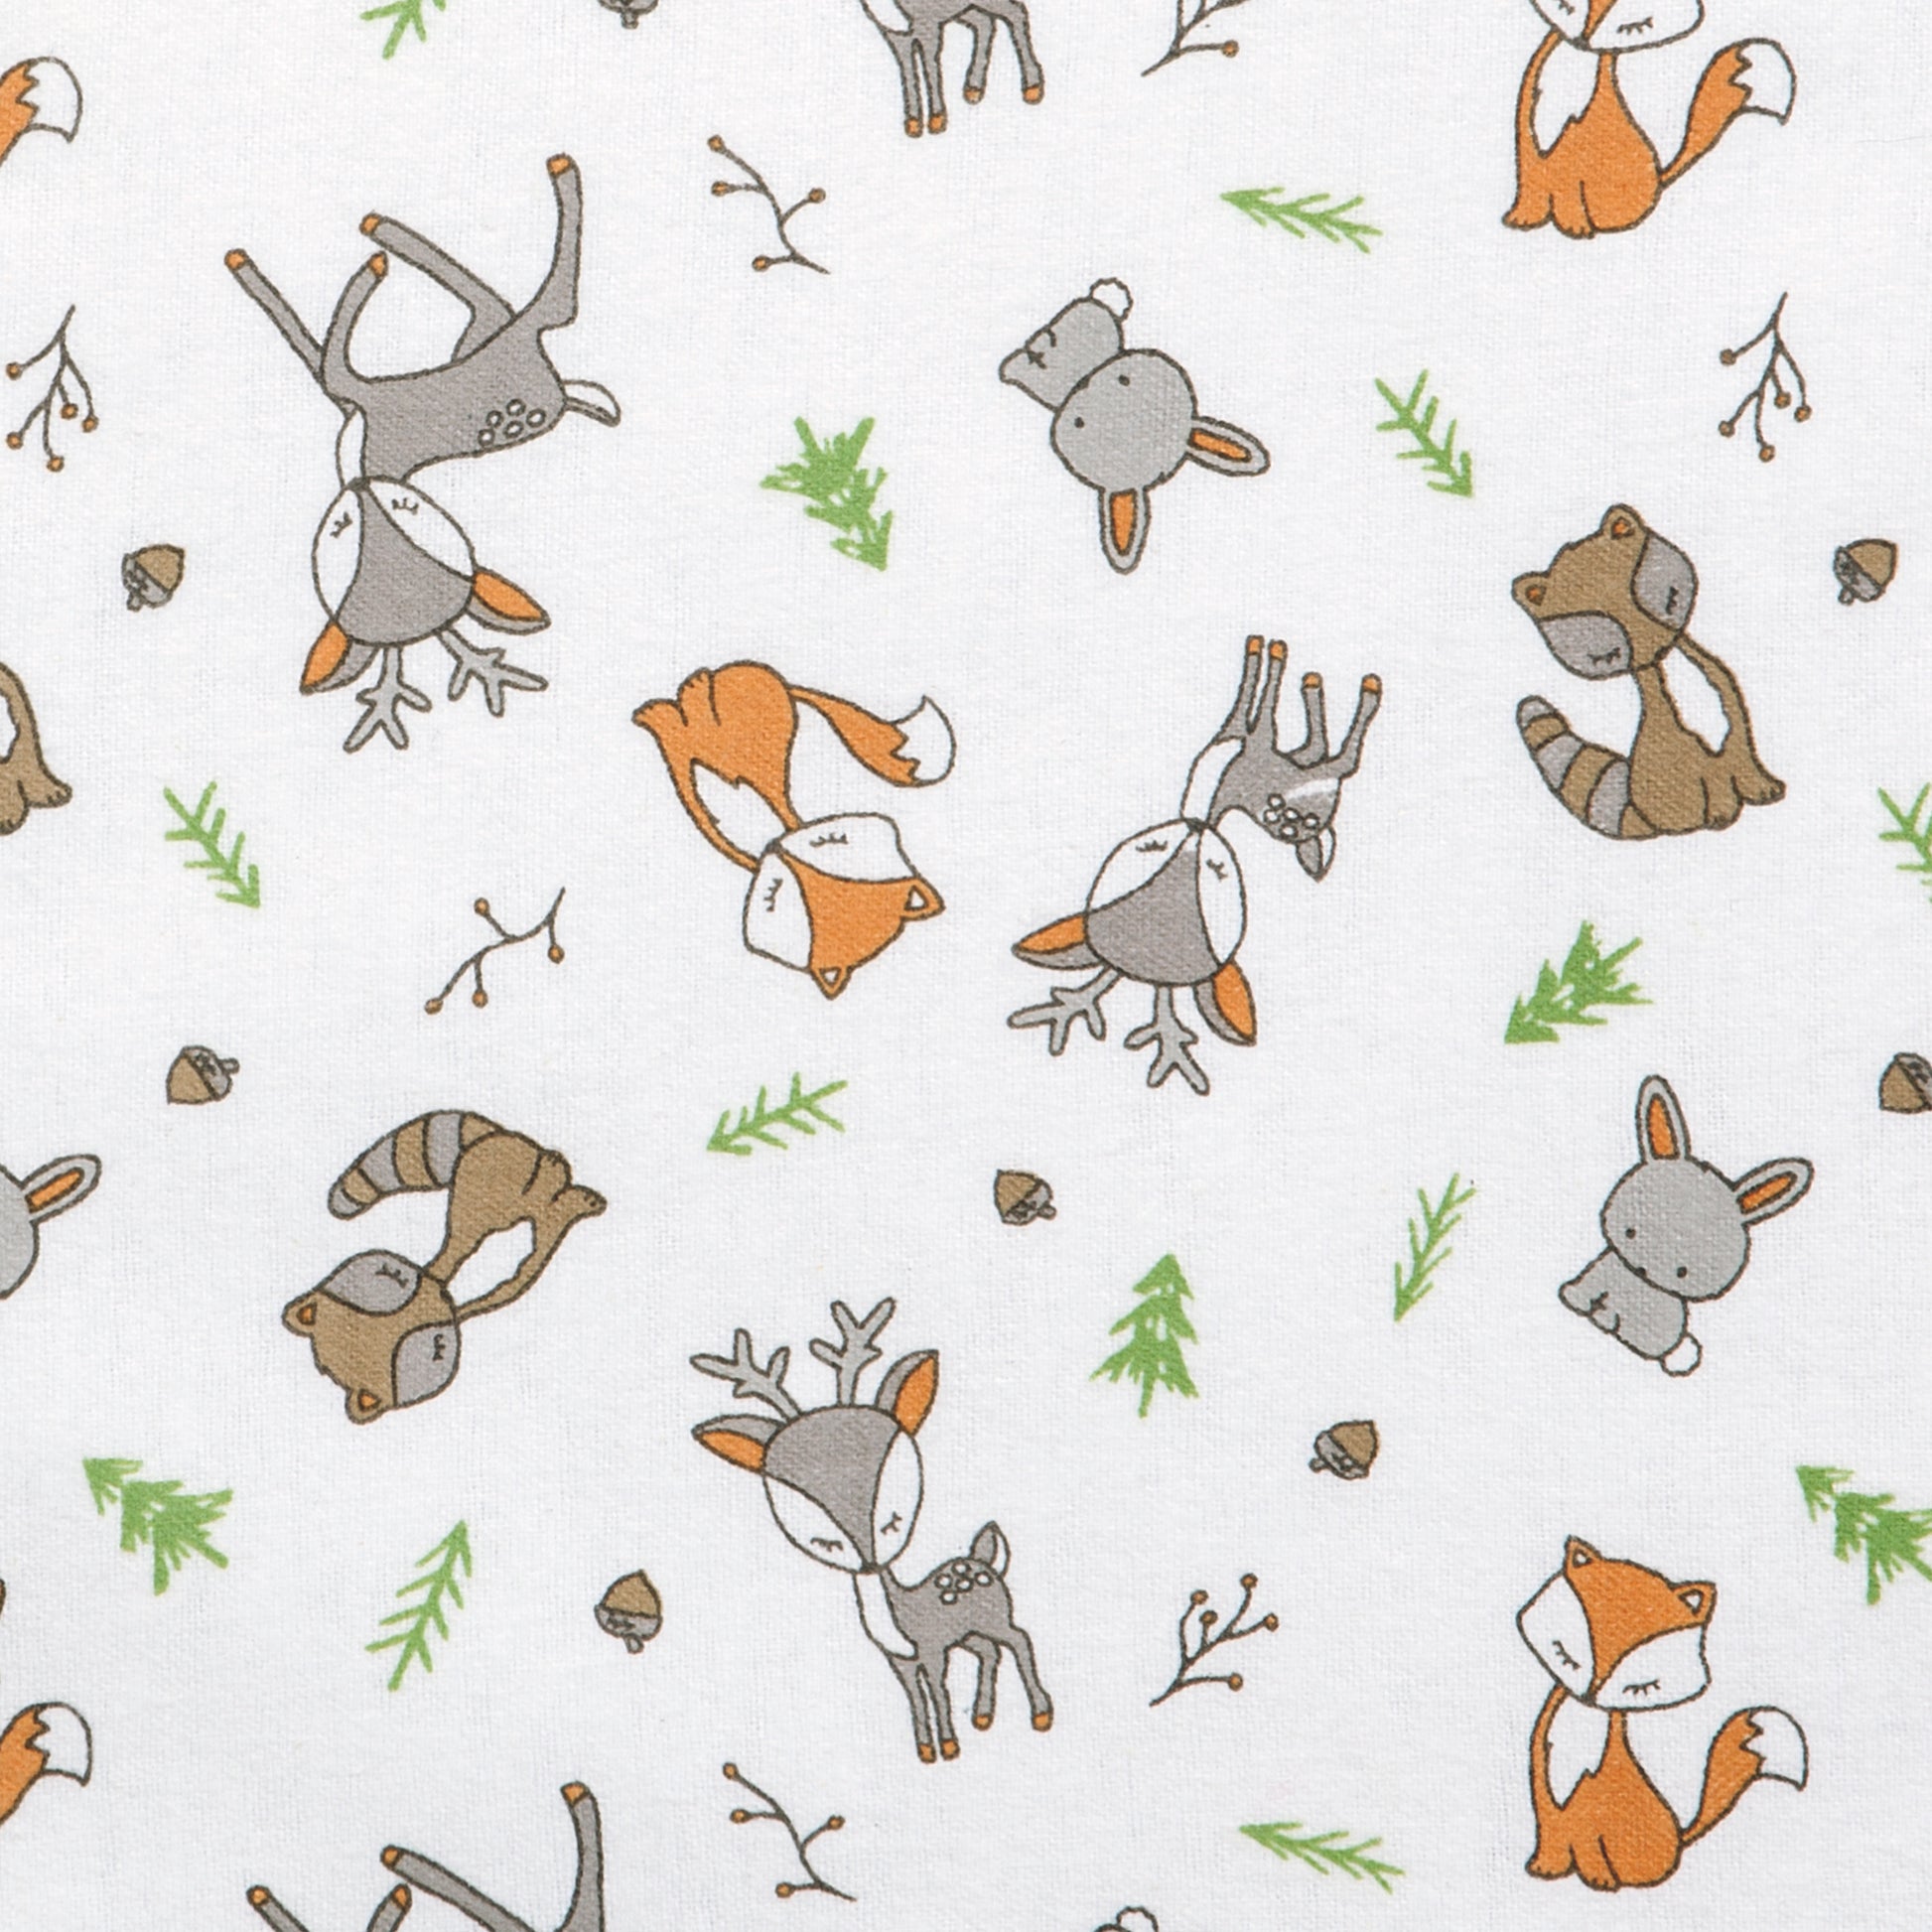 Forest Nap Deluxe Flannel Changing Pad Cover Trend Lab; features a forest animal scatter print with deer, fox, raccoons, bunnies and trees in gray, brown, burnt orange and green. 